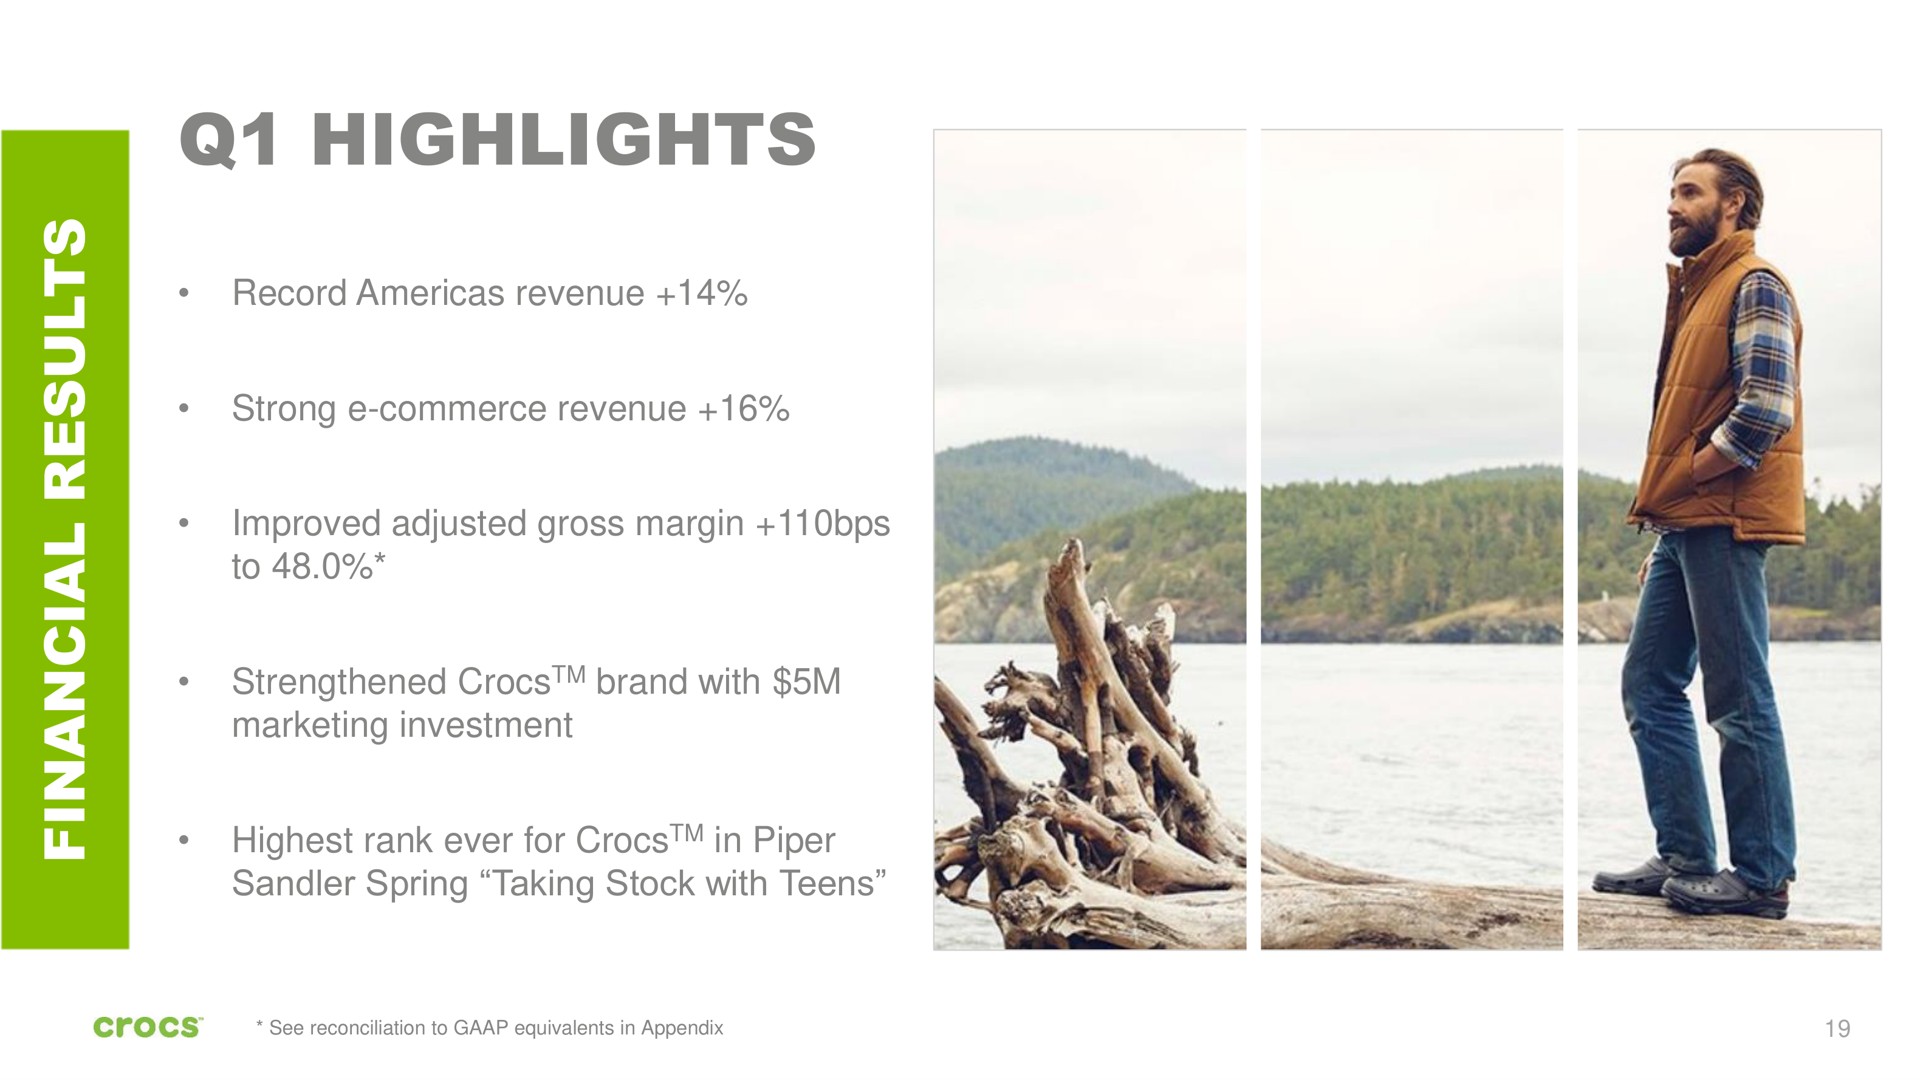 highlights a a record revenue strong commerce revenue i improved adjusted gross margin to strengthened brand with marketing investment spring taking stock with teens highest rank ever for in piper | Crocs